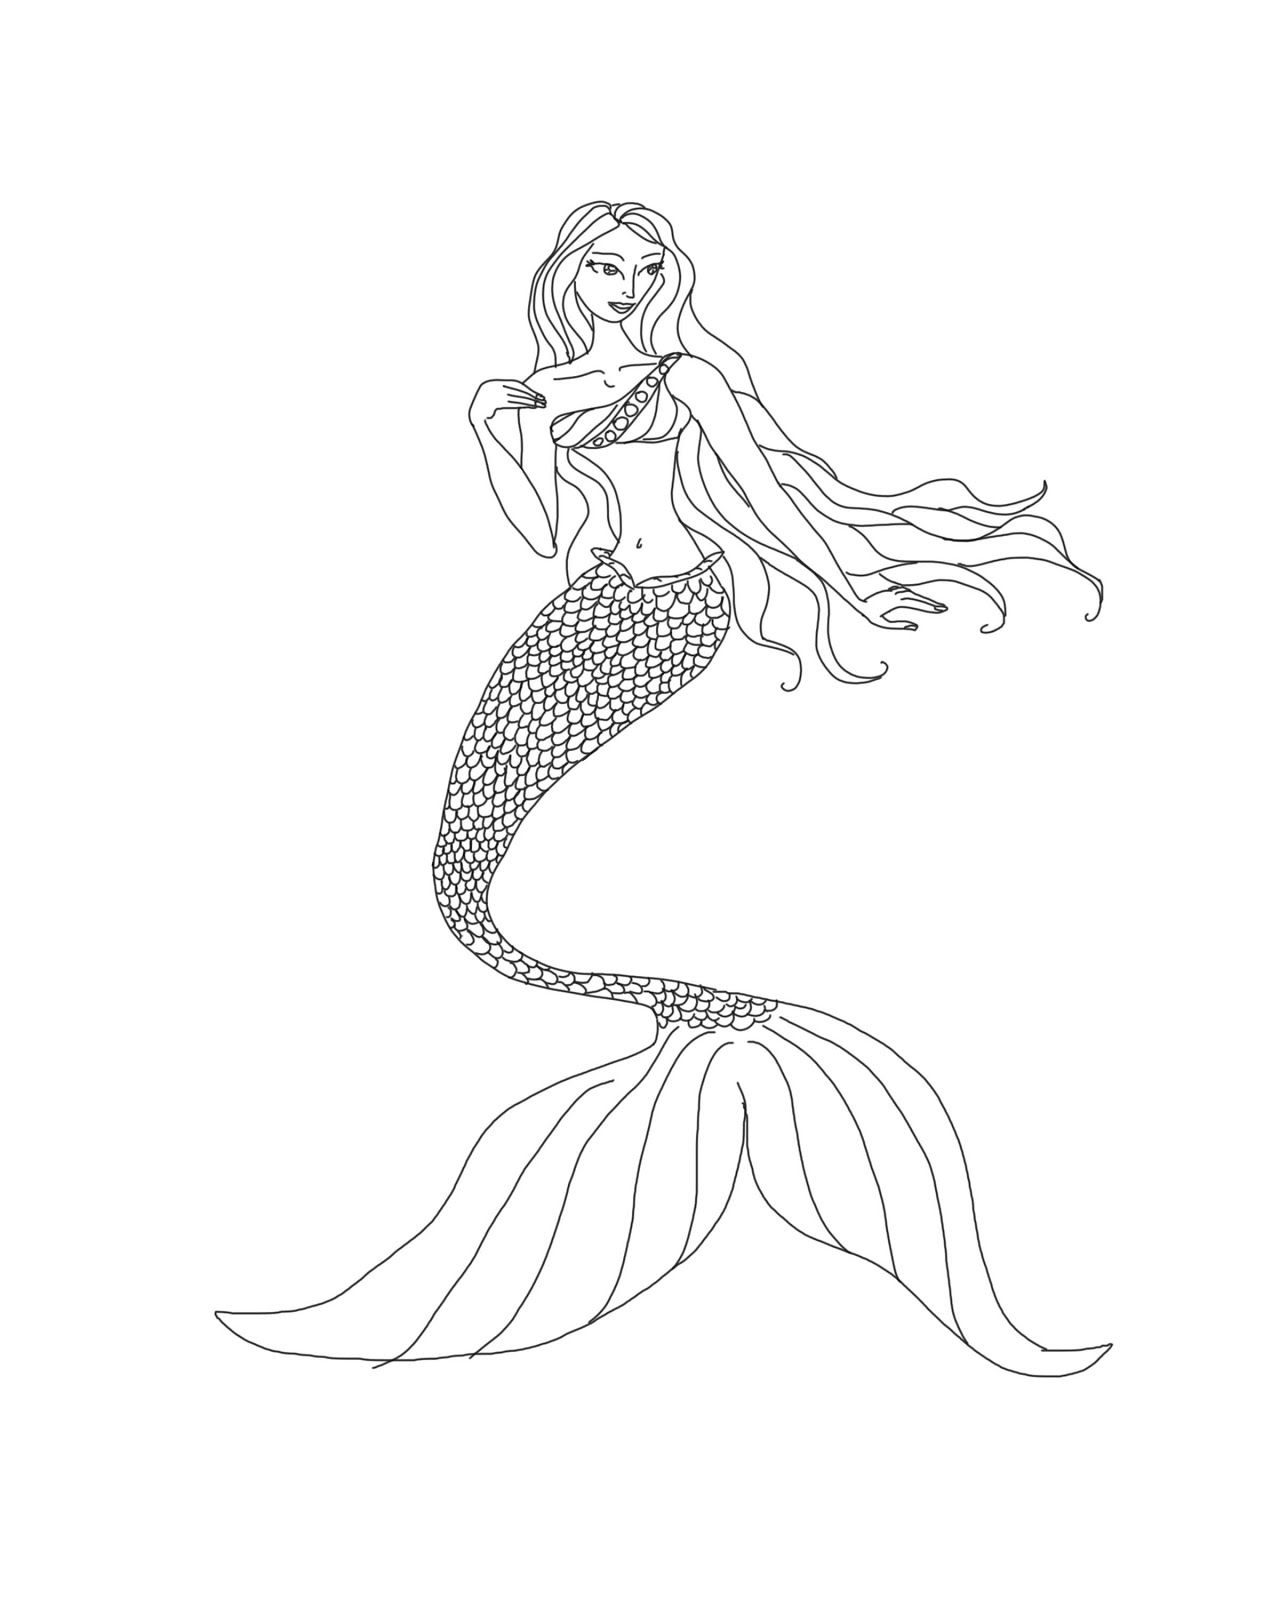 Printable Realistic Mermaid Coloring Pages - High Quality Coloring